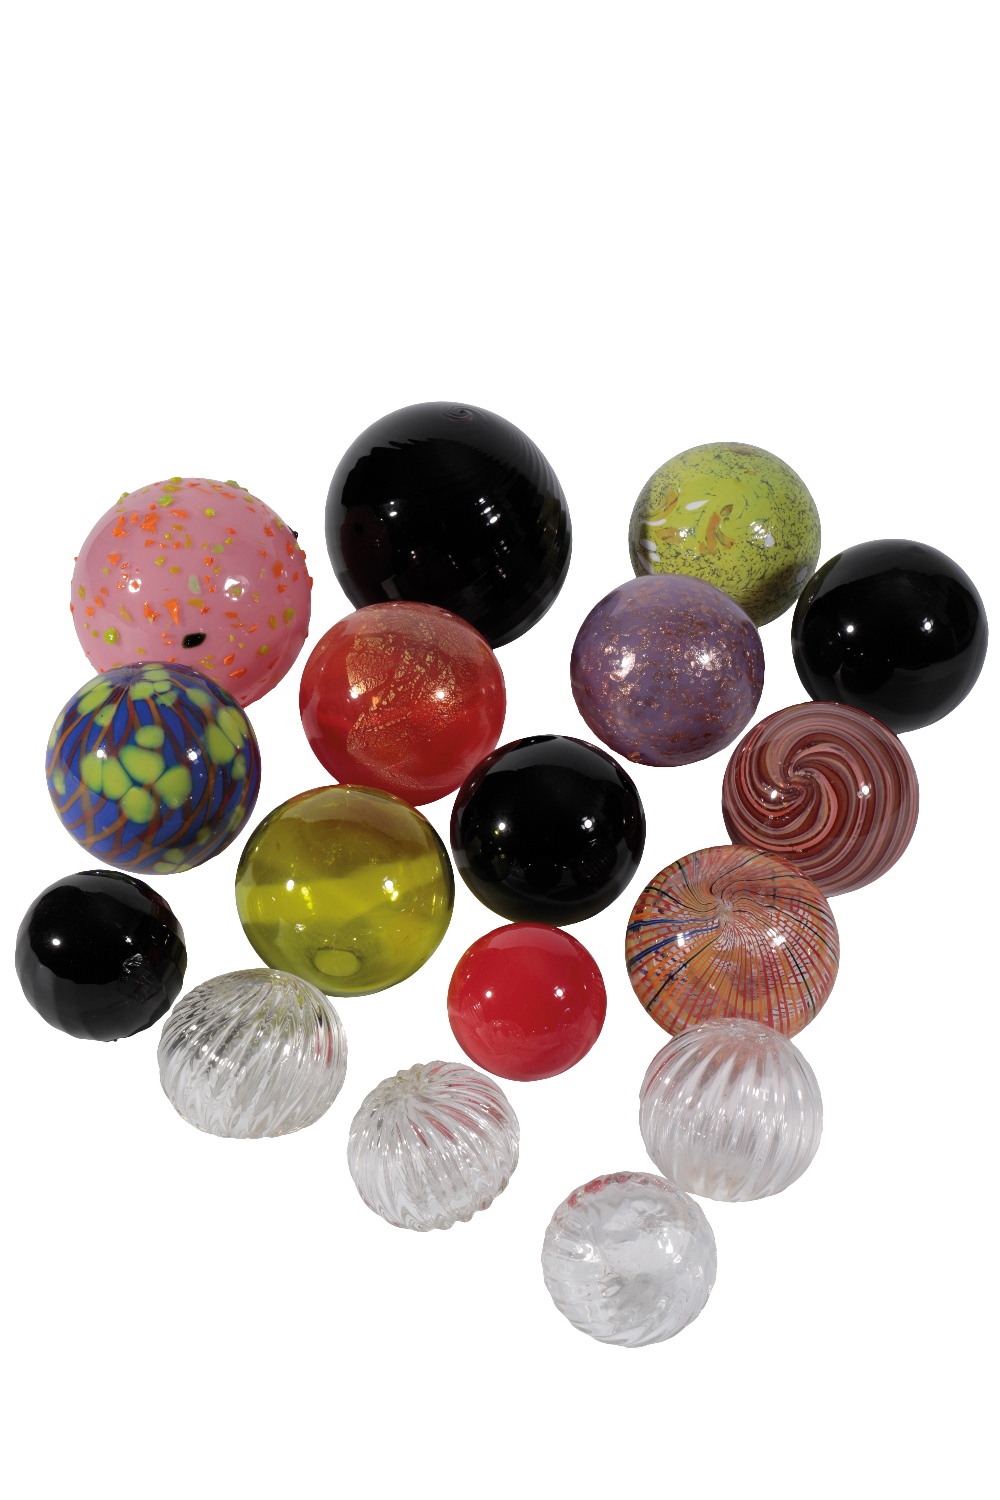 GINNY RUFFNER (b.1952): A COLLECTION OF GLASS "BALL" SCULPTURES